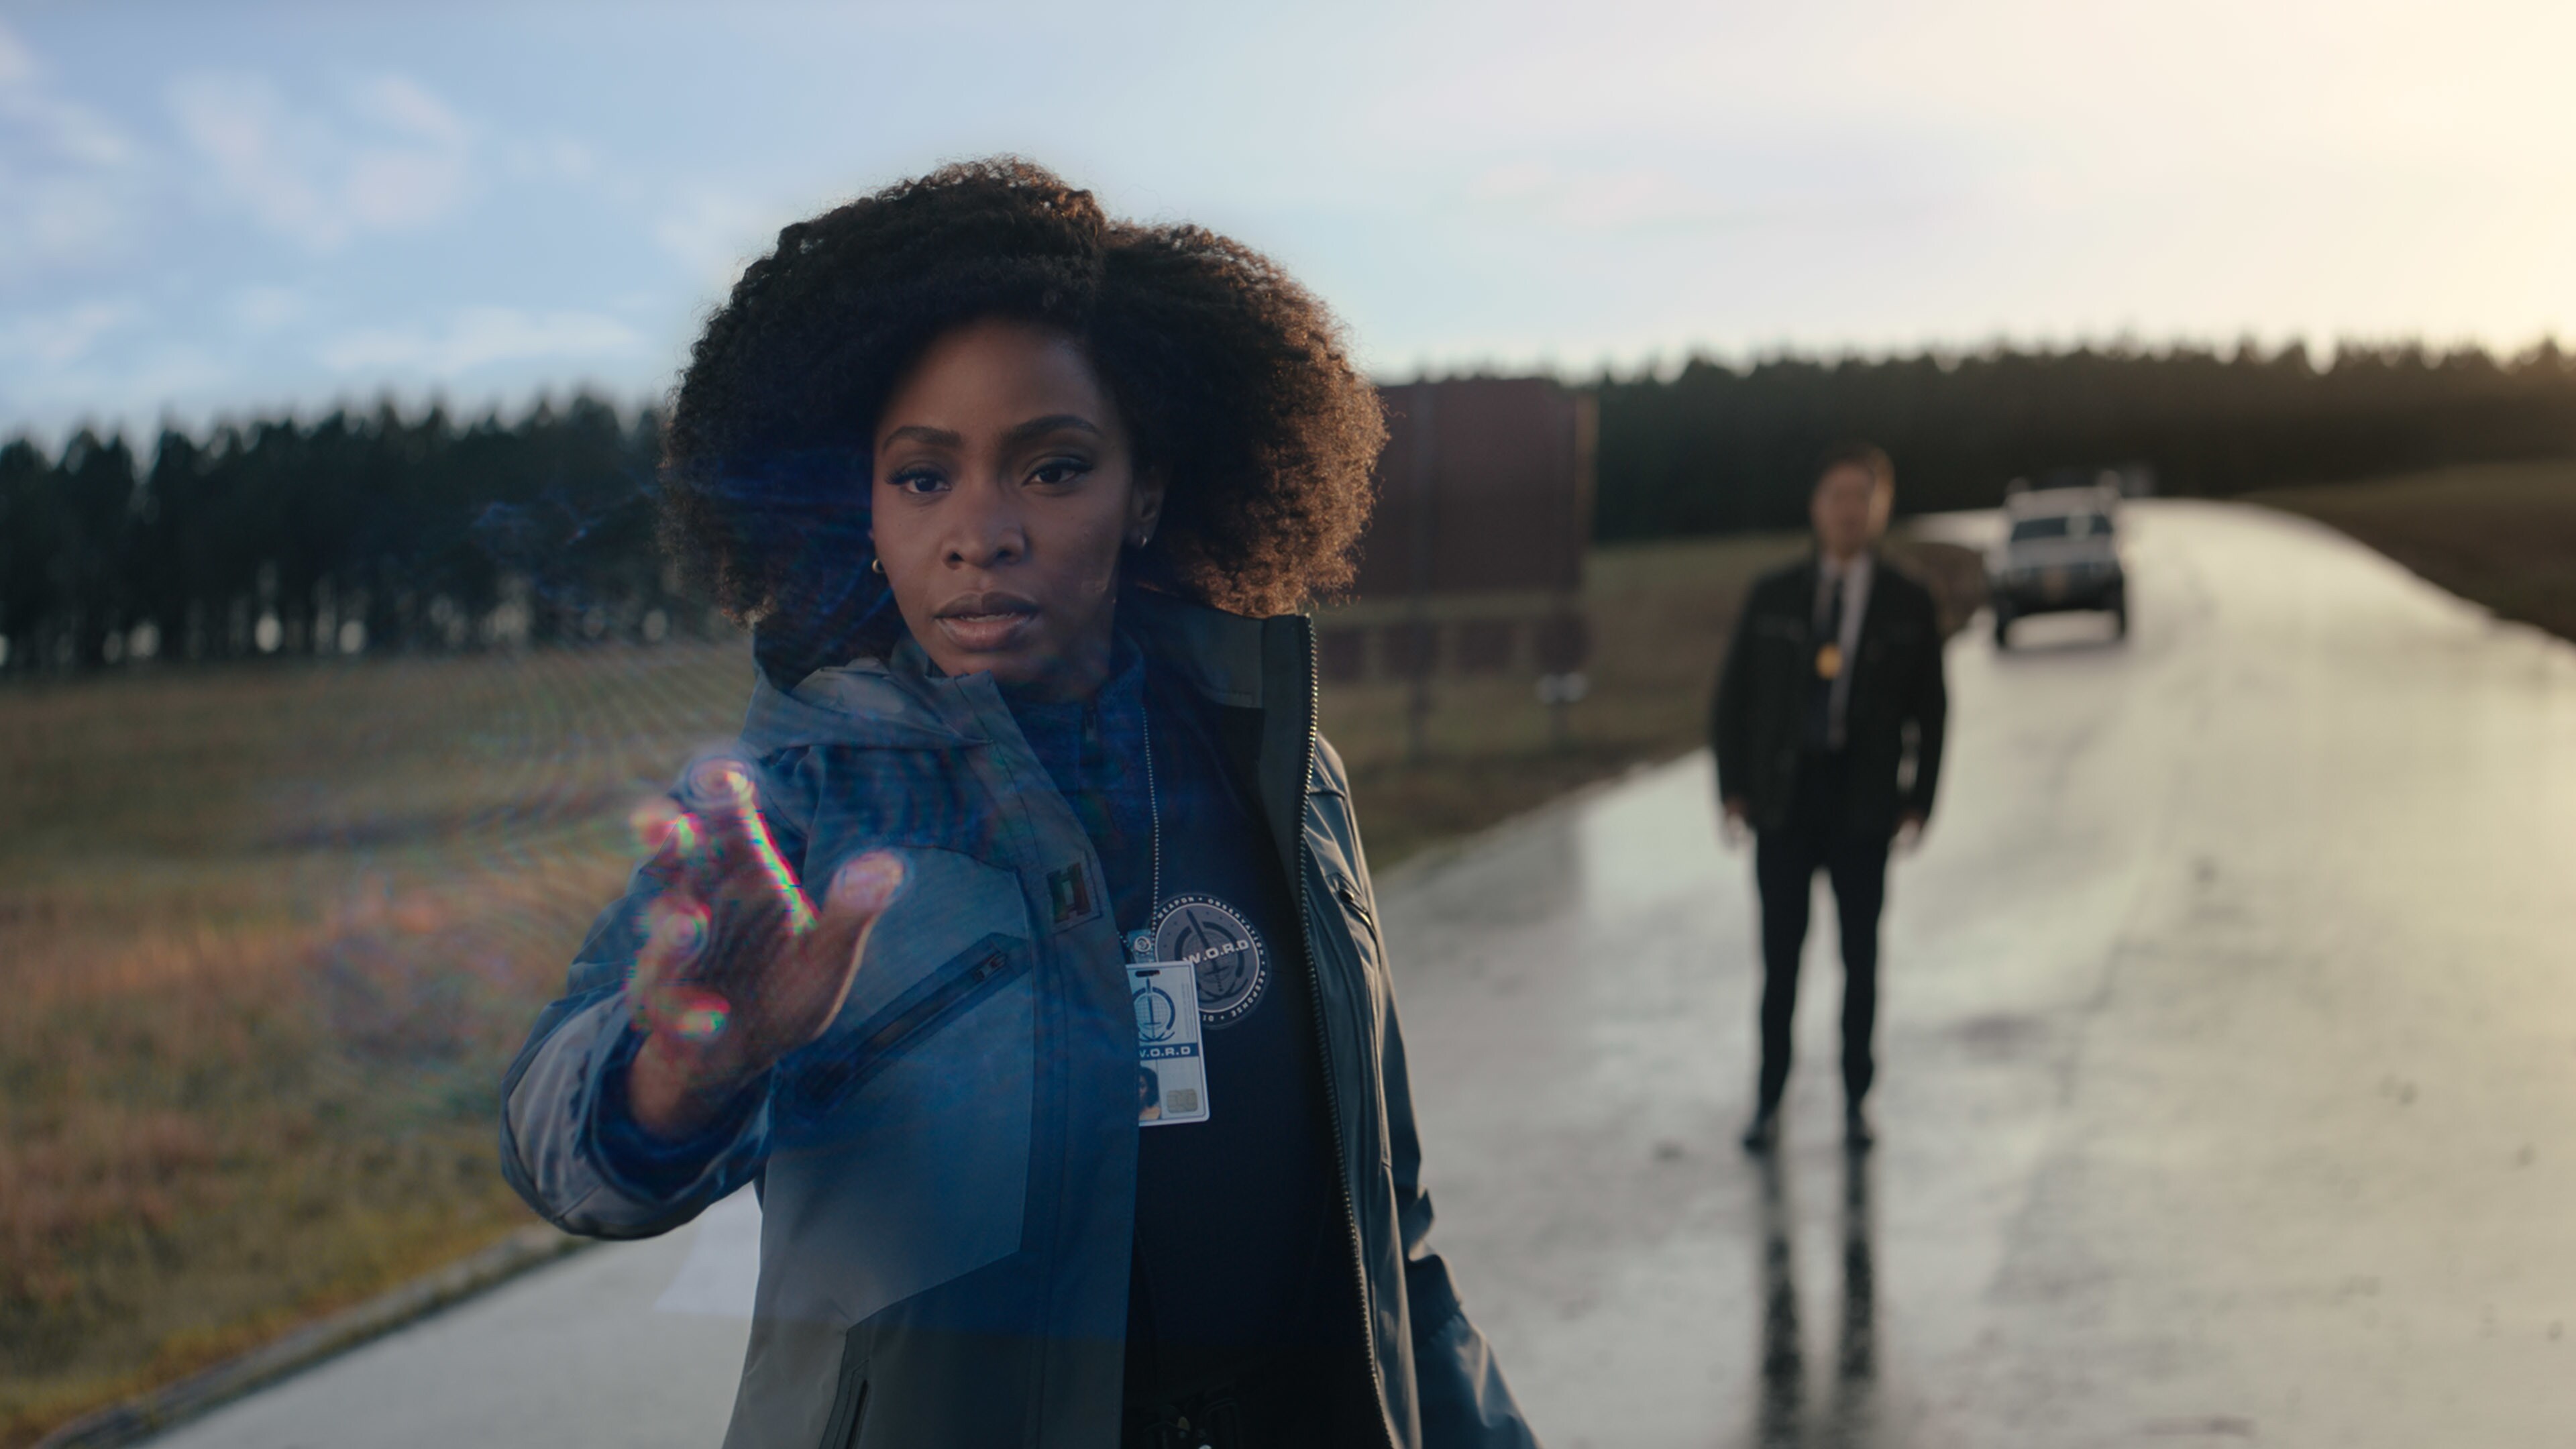 (L-R): Teyonah Parris as Monica Rambeau and Randall Park as Jimmy Woo in Marvel Studios' WANDAVISION exclusively on Disney+. Photo courtesy of Marvel Studios. ©Marvel Studios 2021. All Rights Reserved.